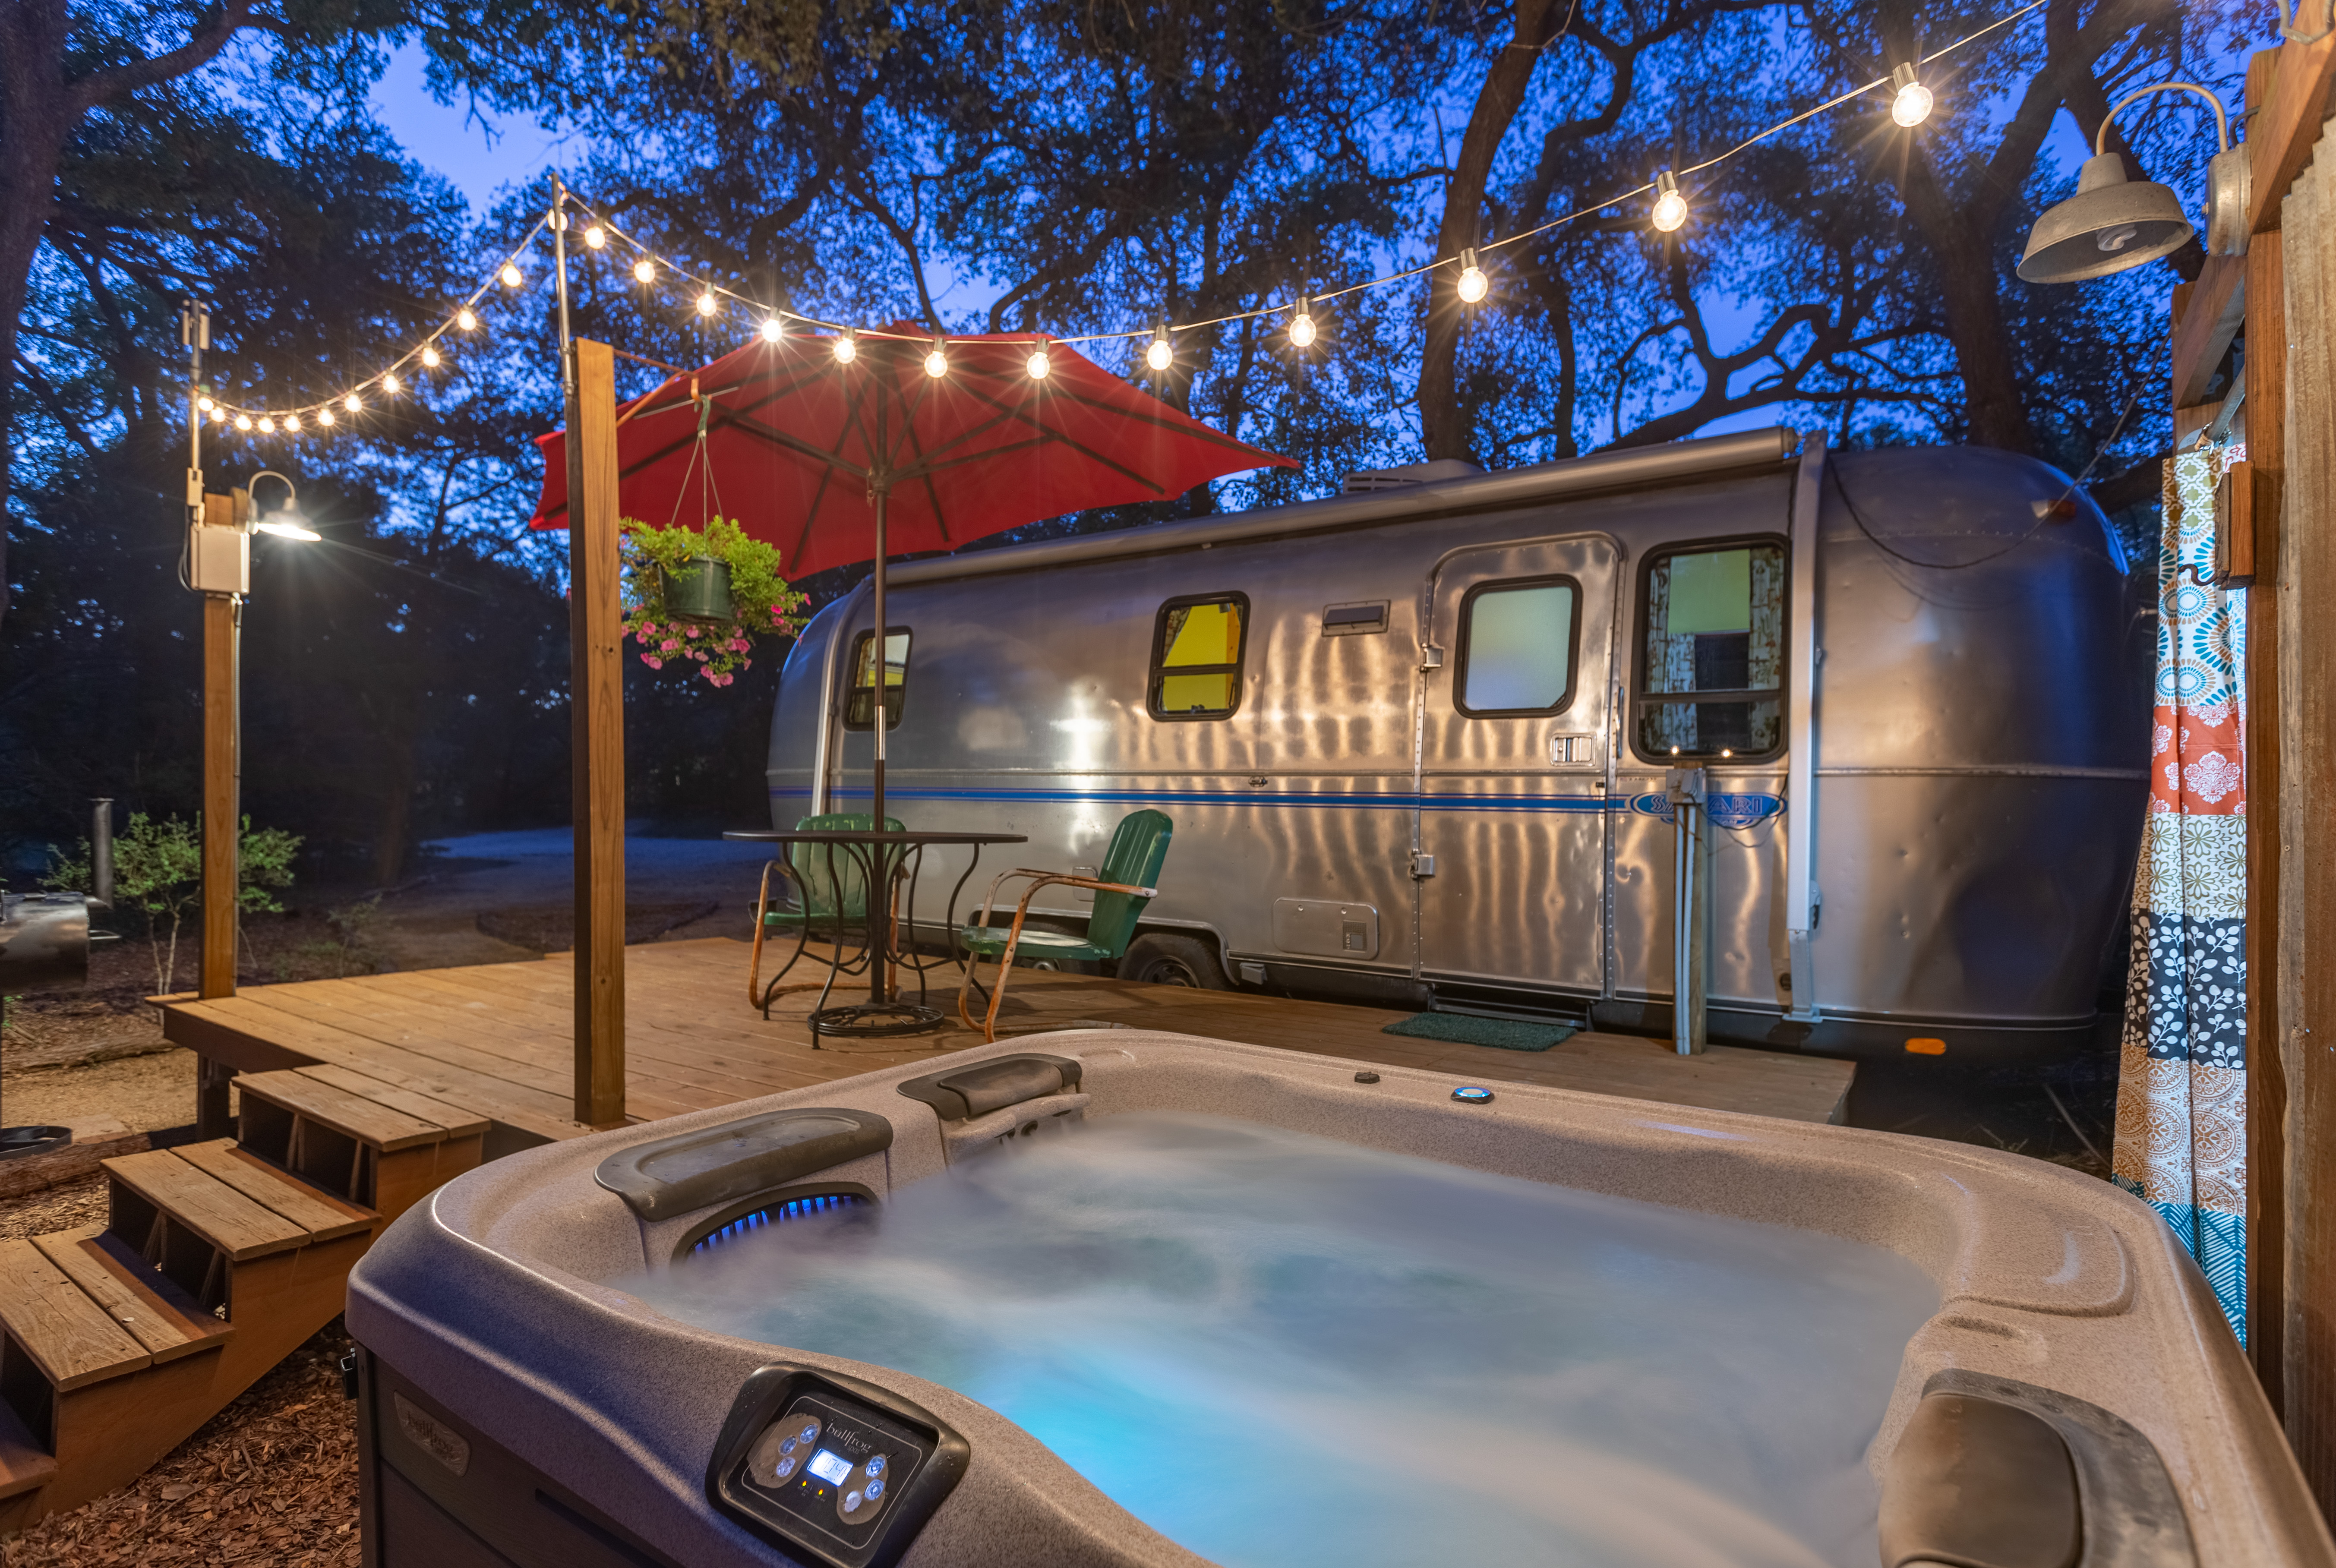 Exterior shot of a chrome airstream trailer featuring a hot tub in the foreground.